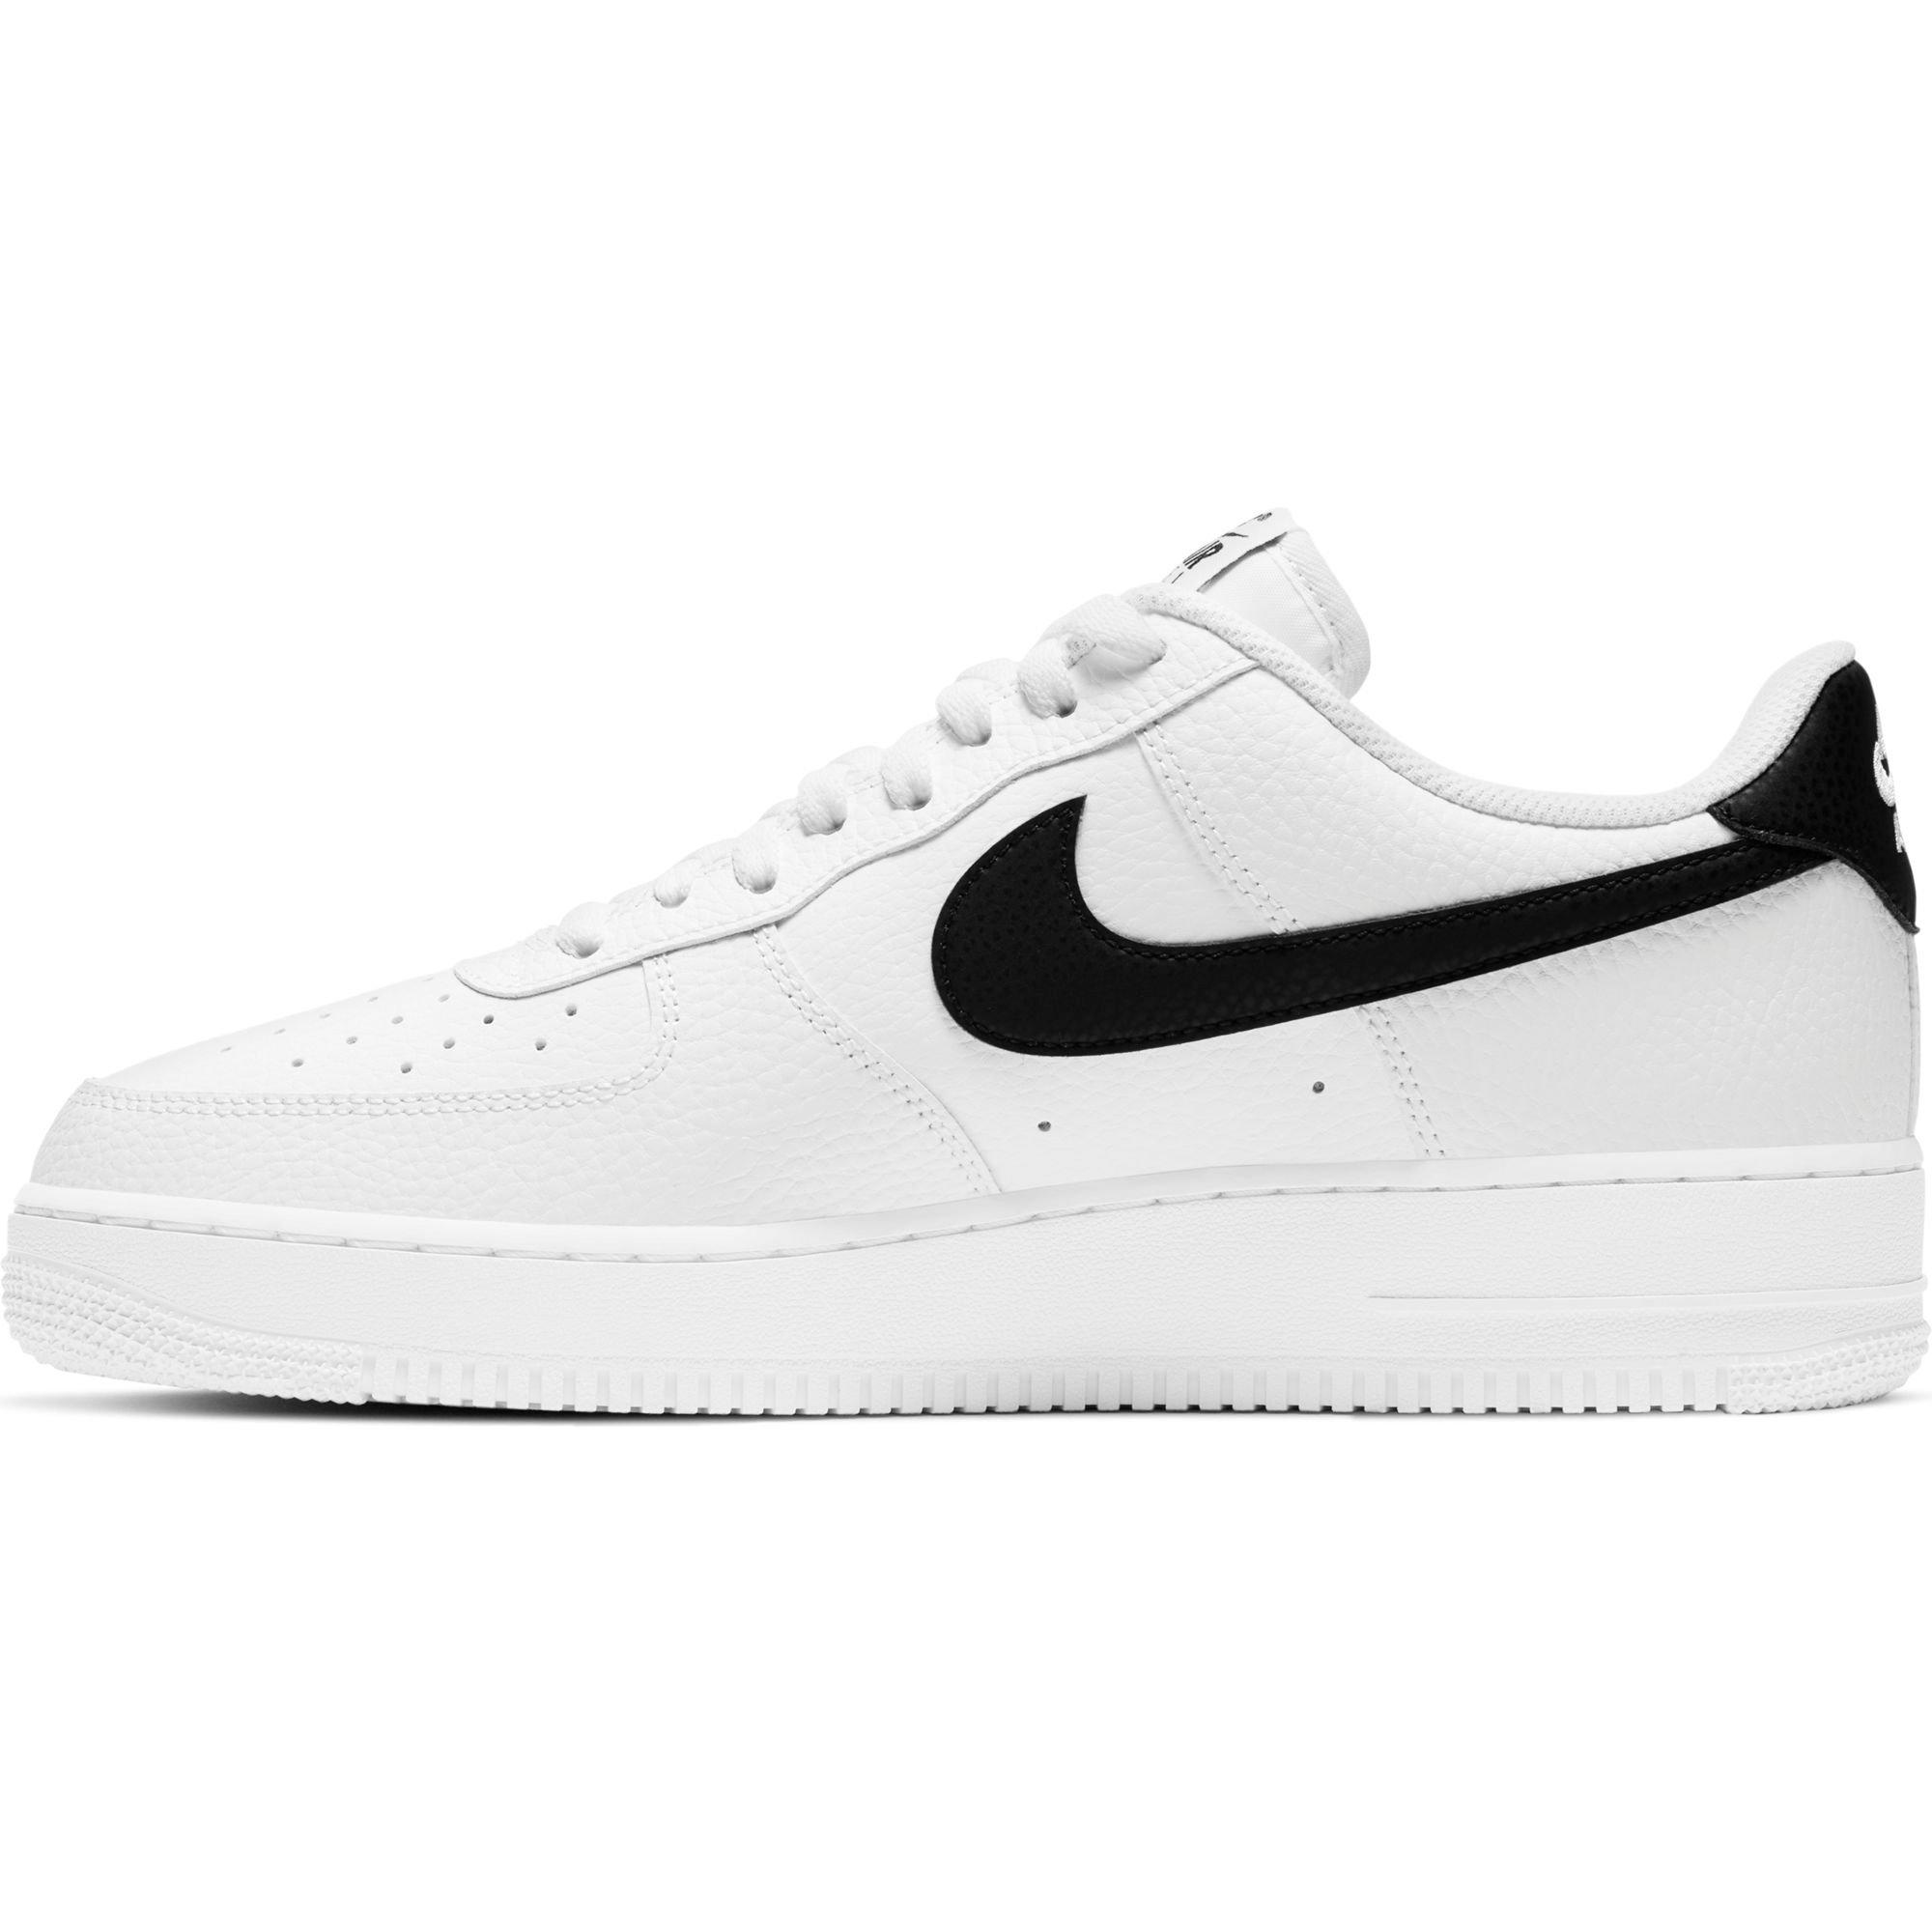 Nike Air Force 1 '07 LV8 Women's Shoes Size 5 (Black)